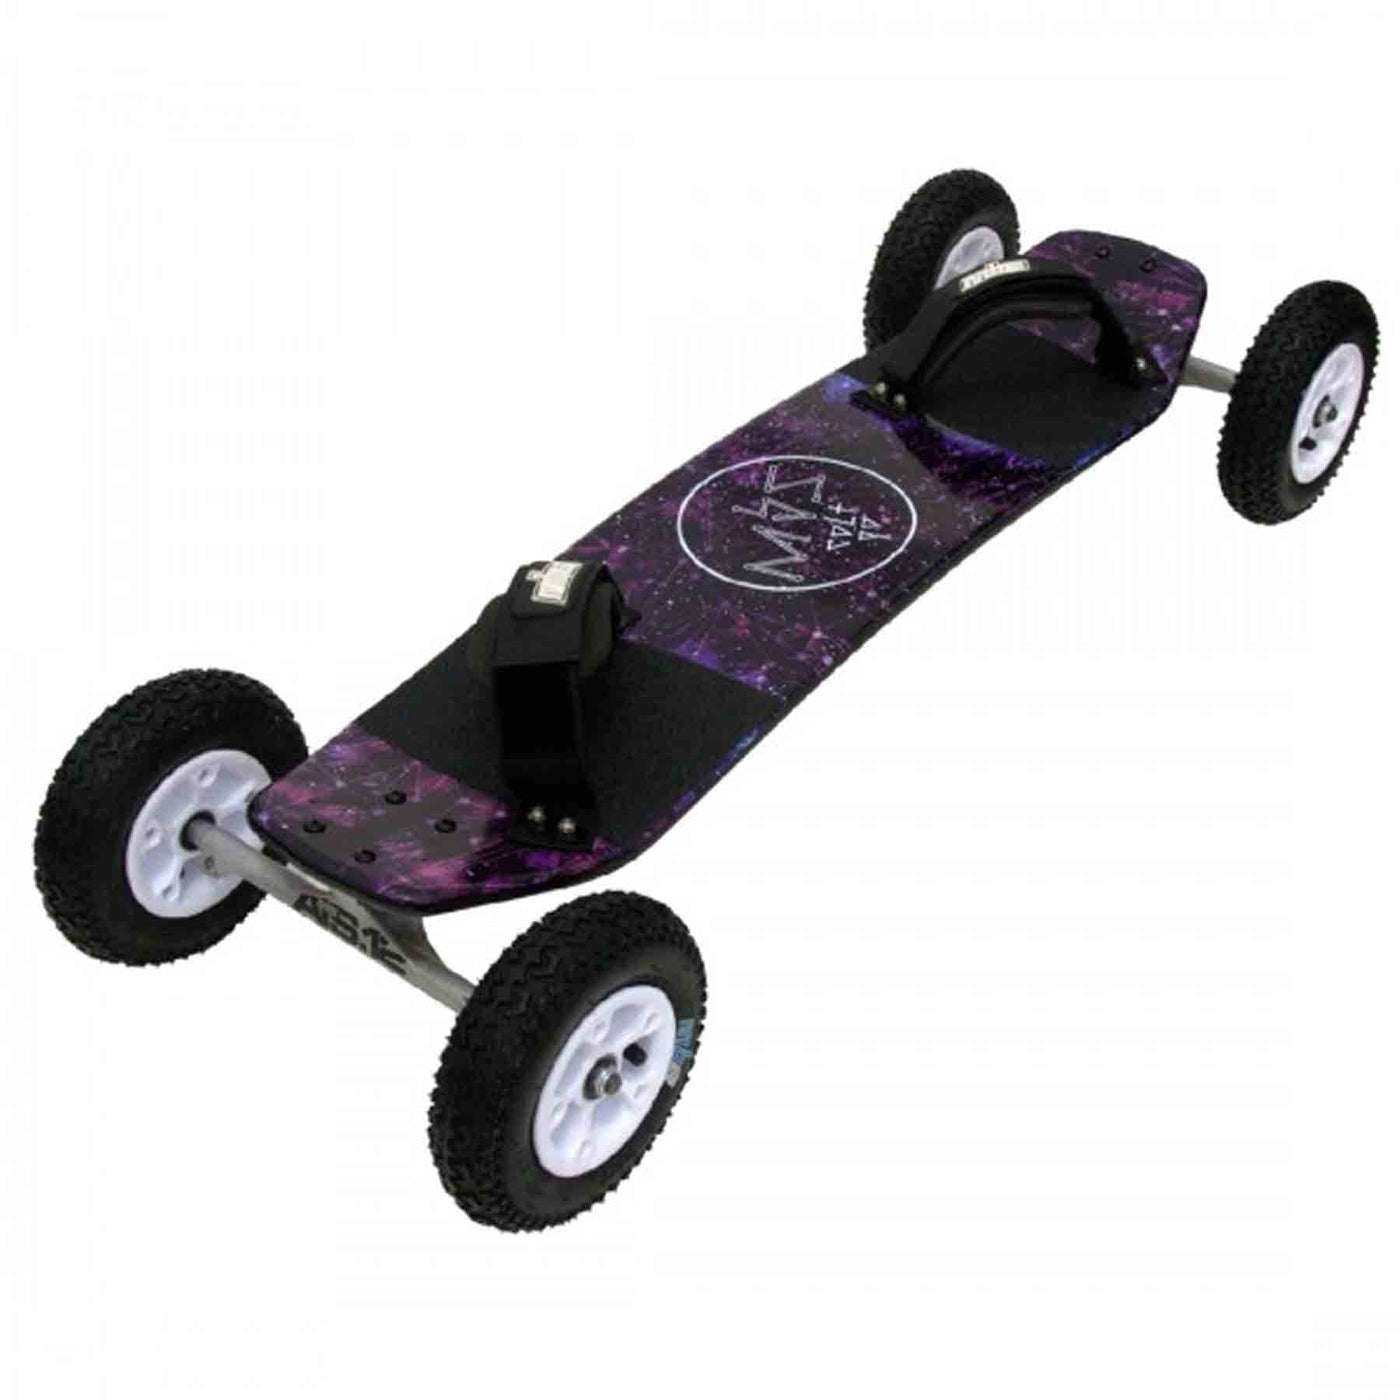 MBS Colt 90 Mountainboard - Constellation MBS